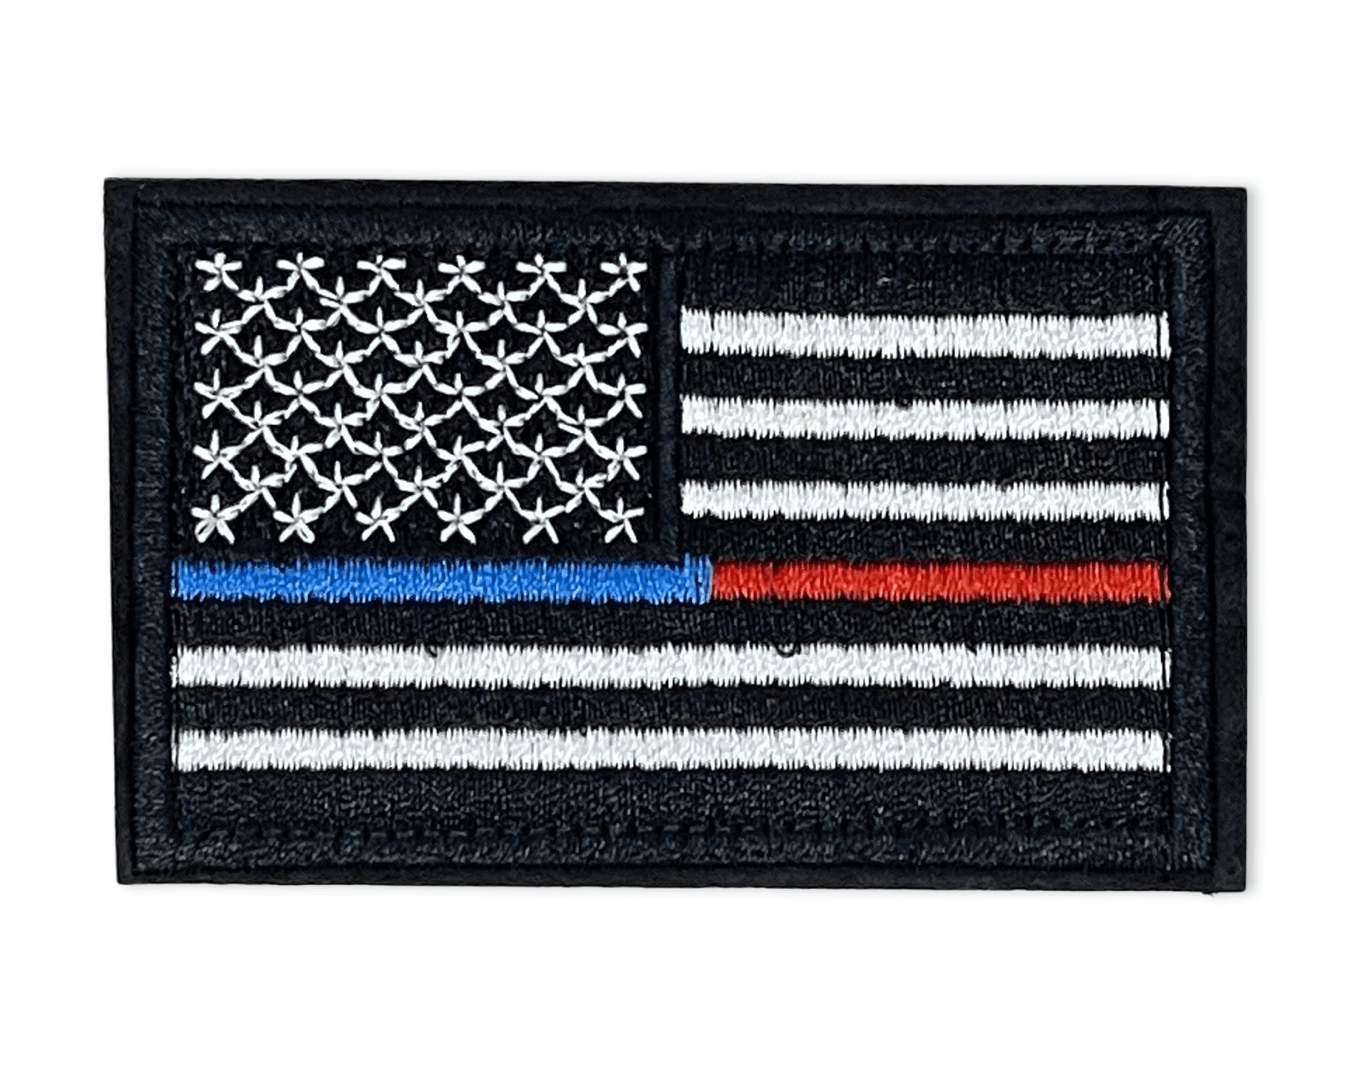 USA Flag Patch with Velcro Backing - Mercantile Mountain